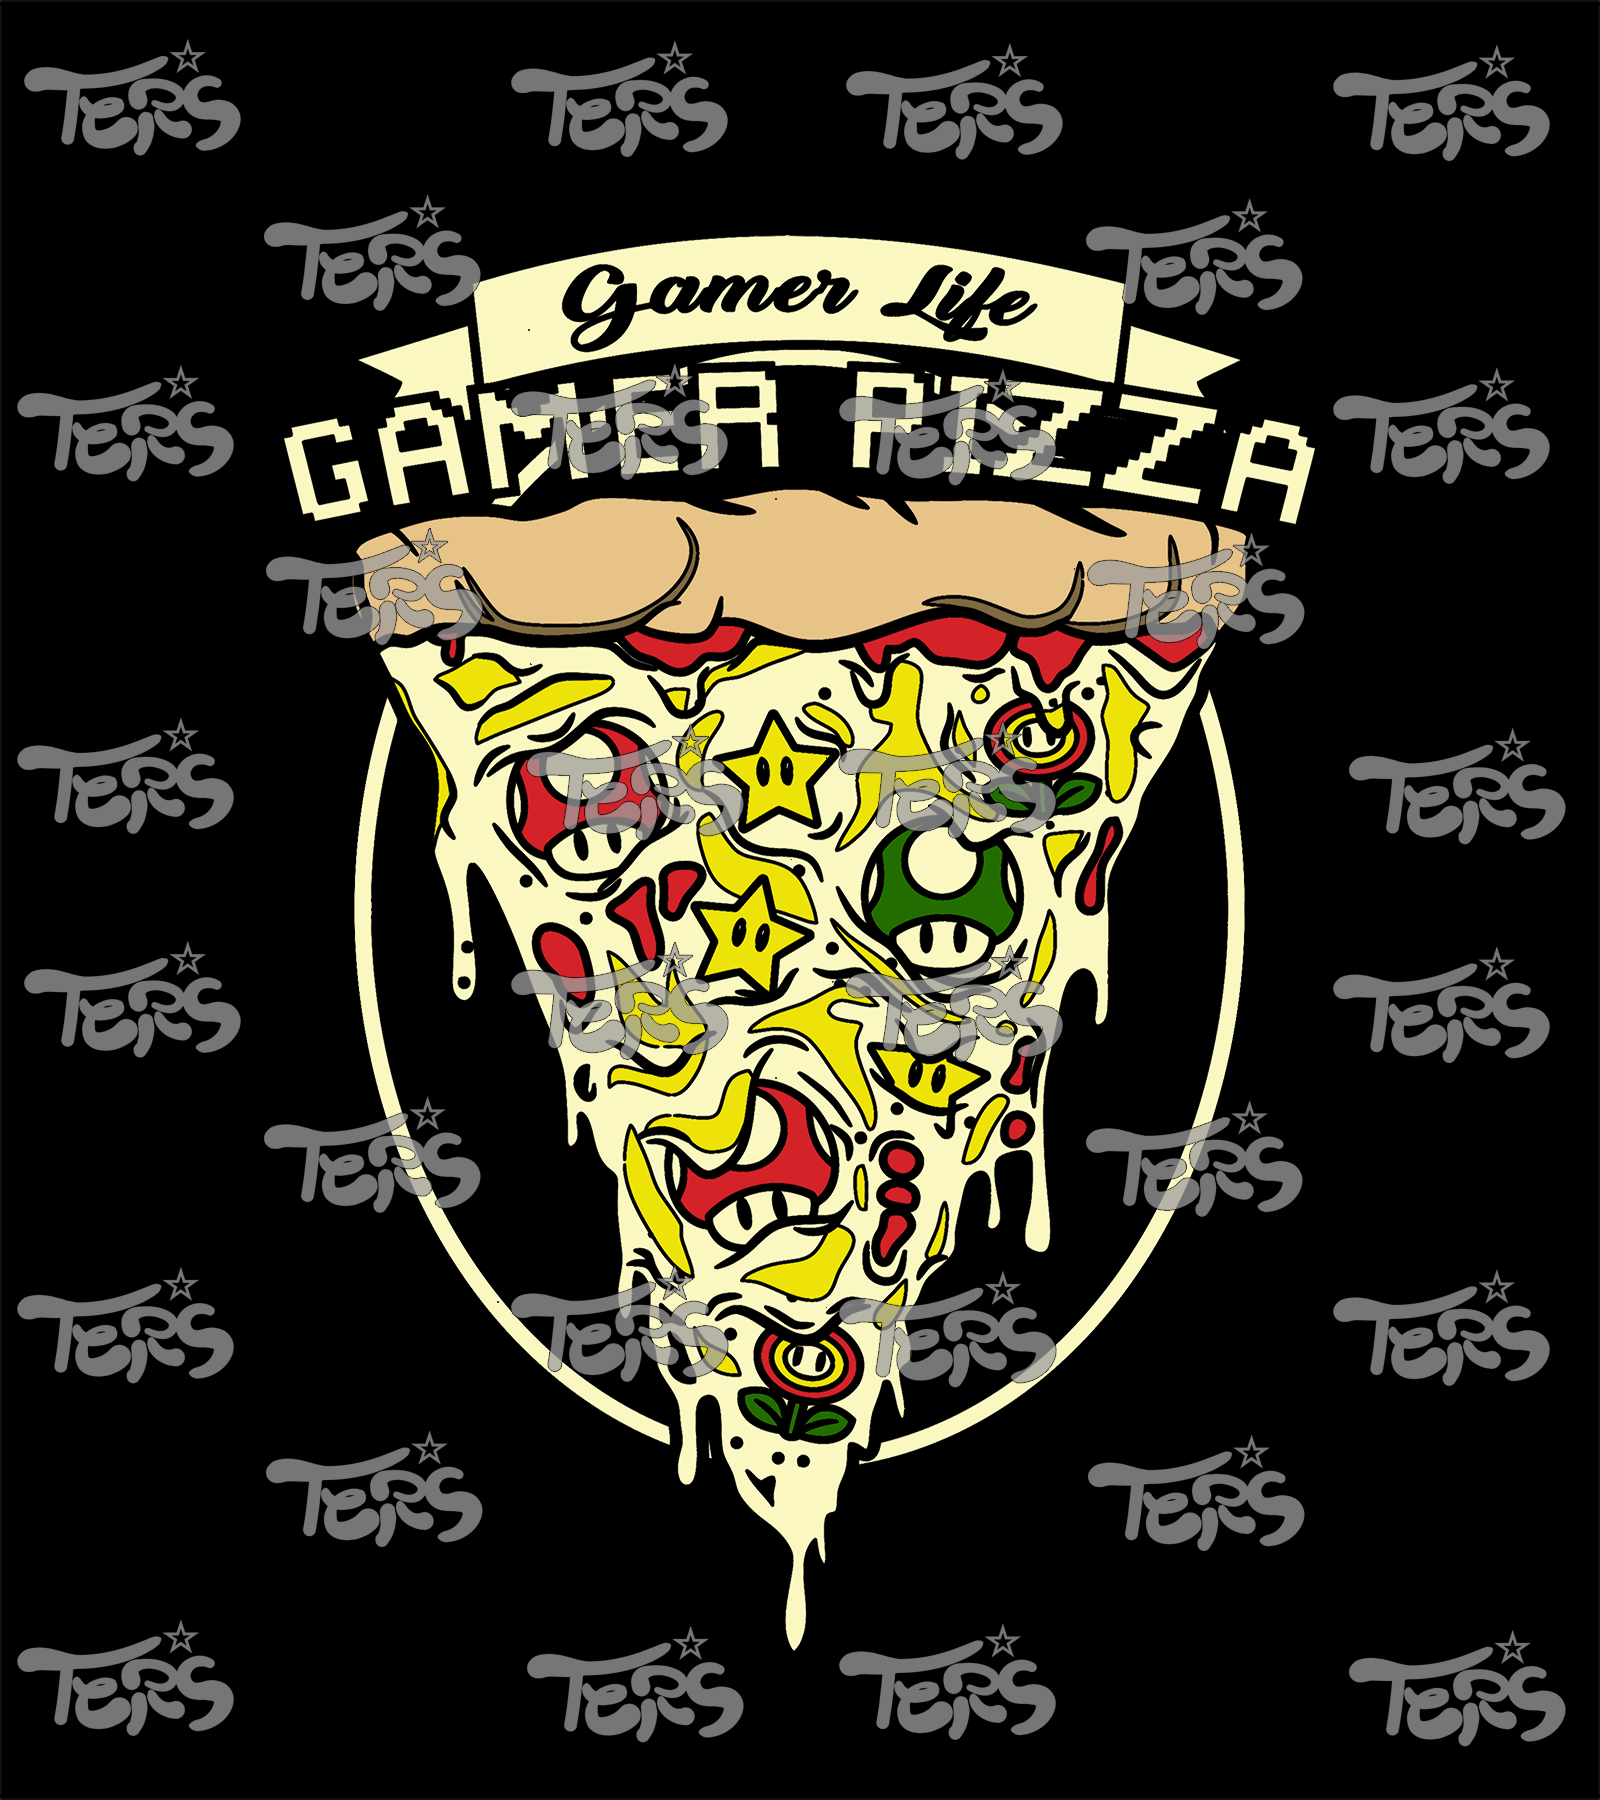 Mouse Pad Gamer Pizza Gamer Life